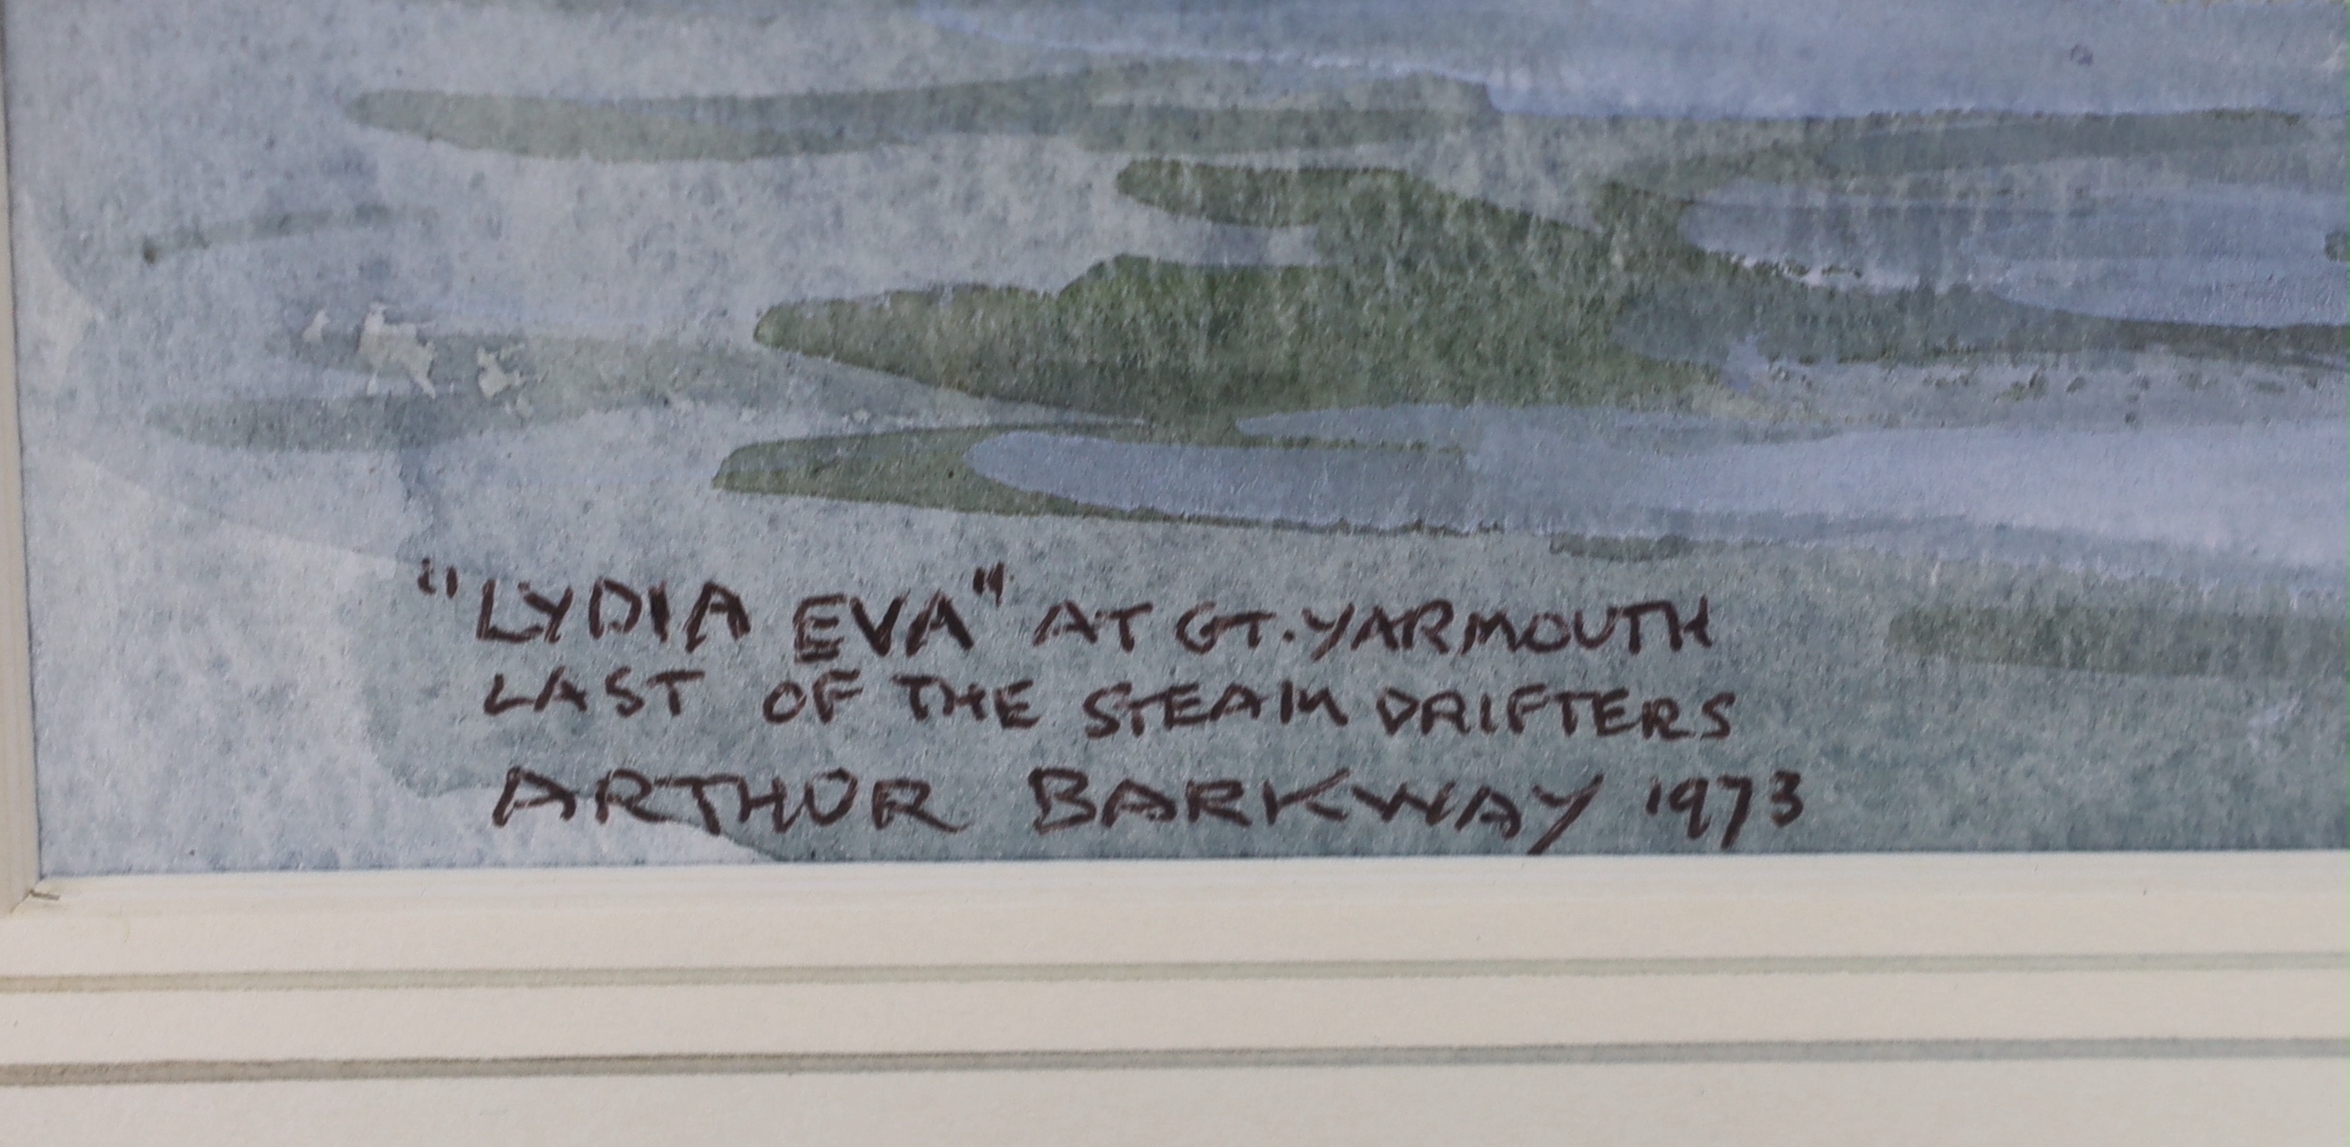 Arthur Barkway (1893-1979) watercolour, 'Lydia Eva YH89', the last of the steam drifters, inscribed, signed and dated 1973, 34 x 24cm